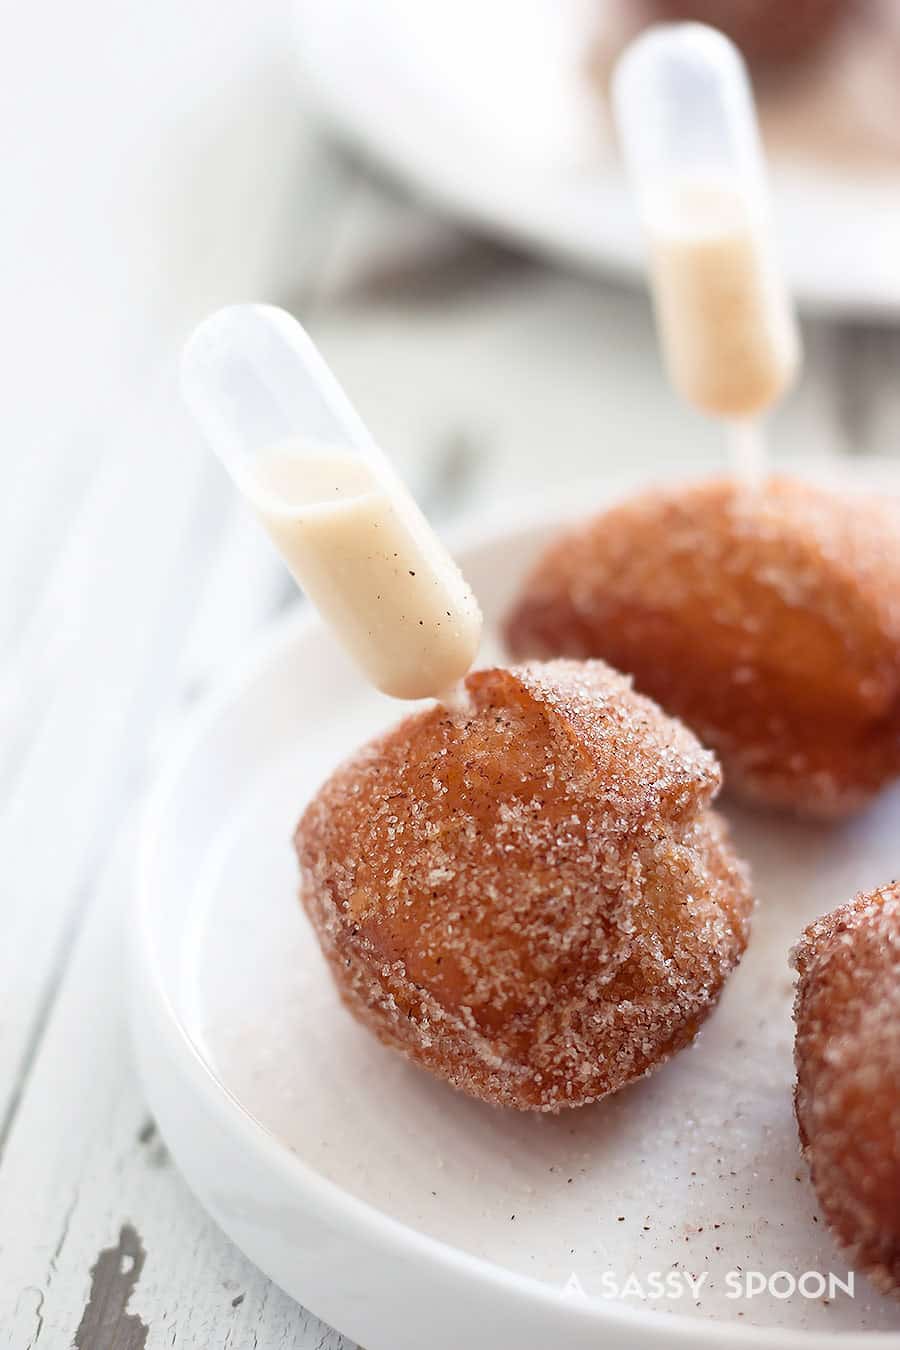 Pipette filled with eggnog that's inserted into a donut hole